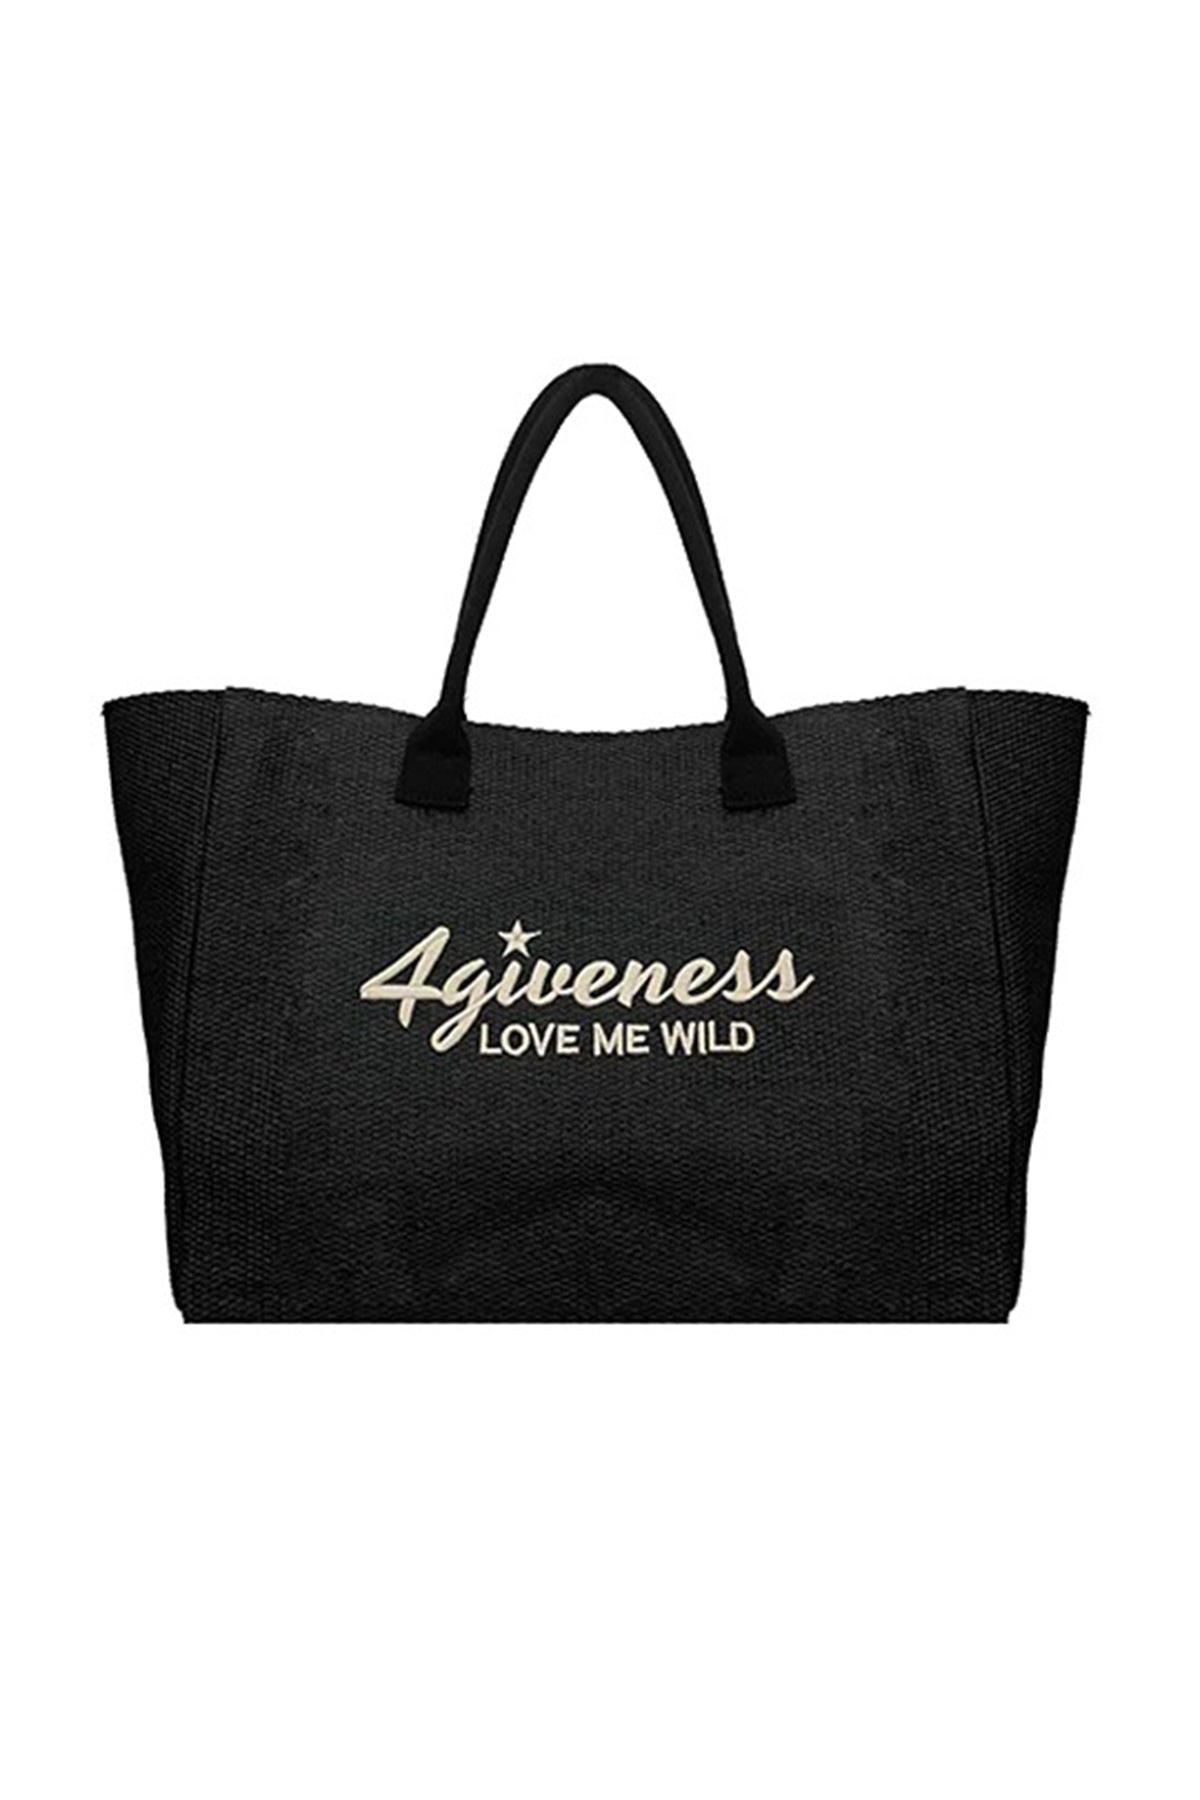 straw paper bag with 4giveness embroidery